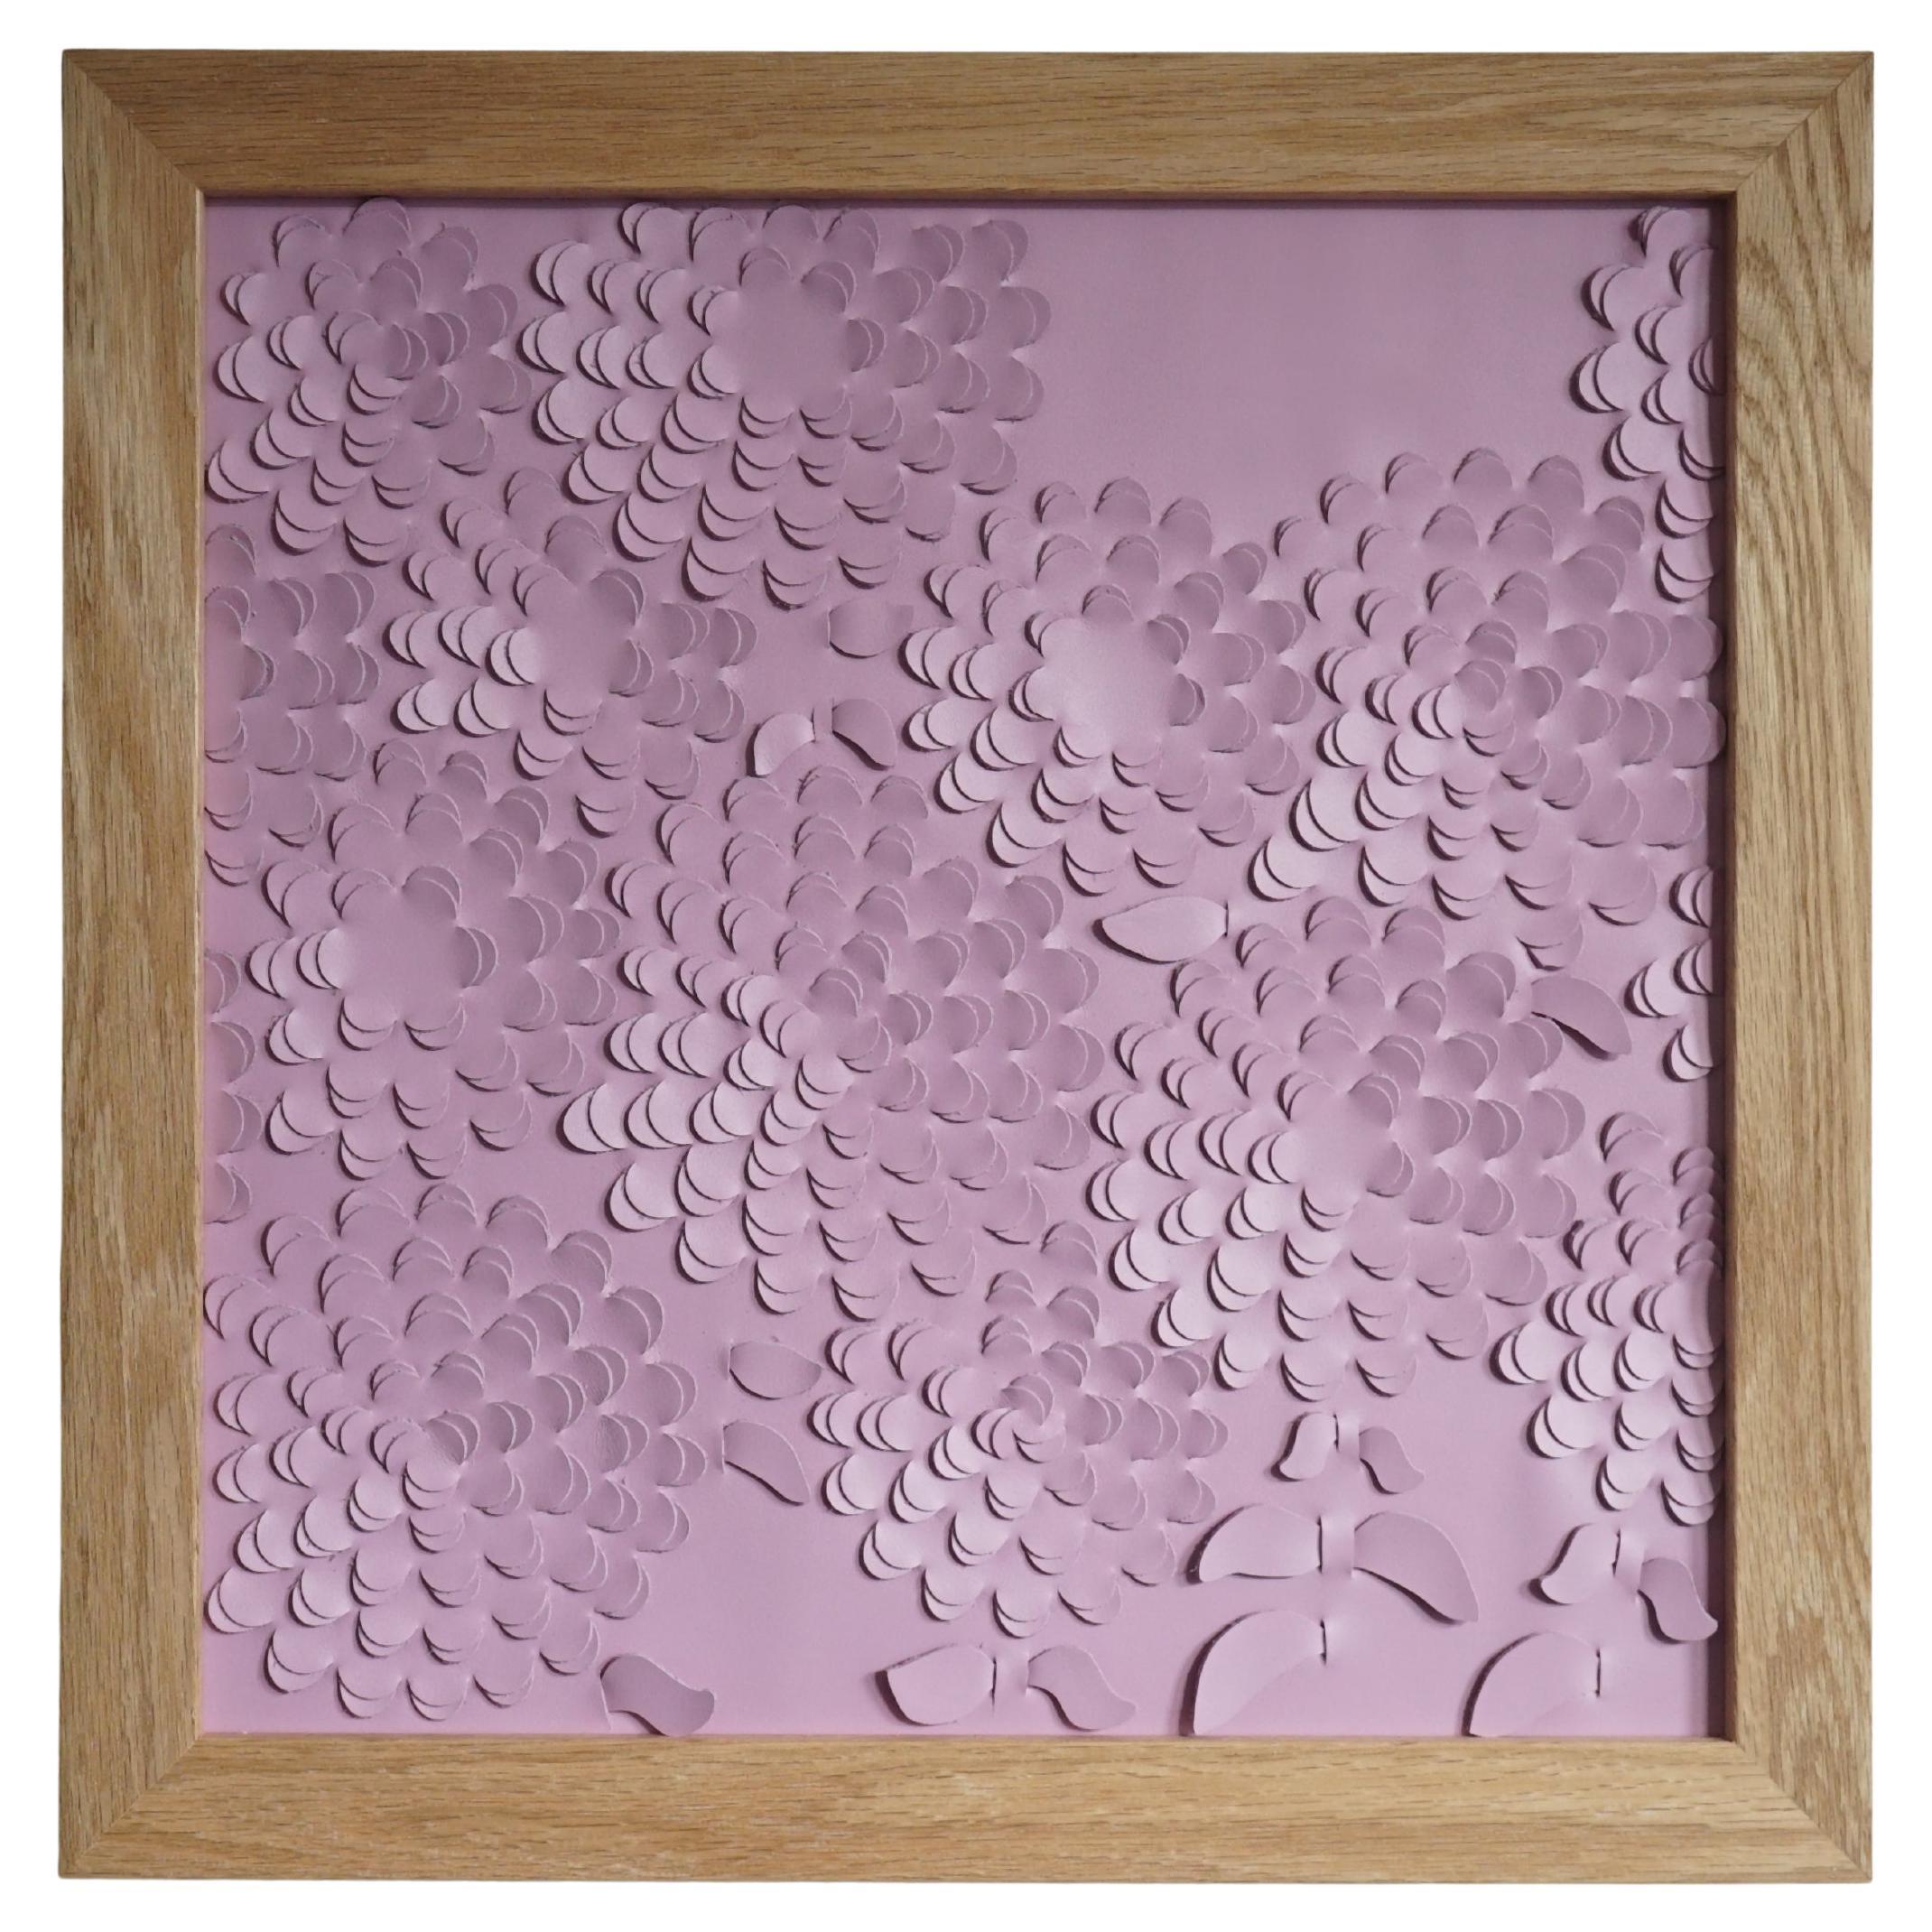 Chrysanthemum:

A piece of 3D sculptural wall art designed and made from two layers of pink leather, woven together by Louise Heighes.
Measurements are 17 x 17 inches or 43 x 43 cm

This piece is inspired by the big mass of repeating petals of the